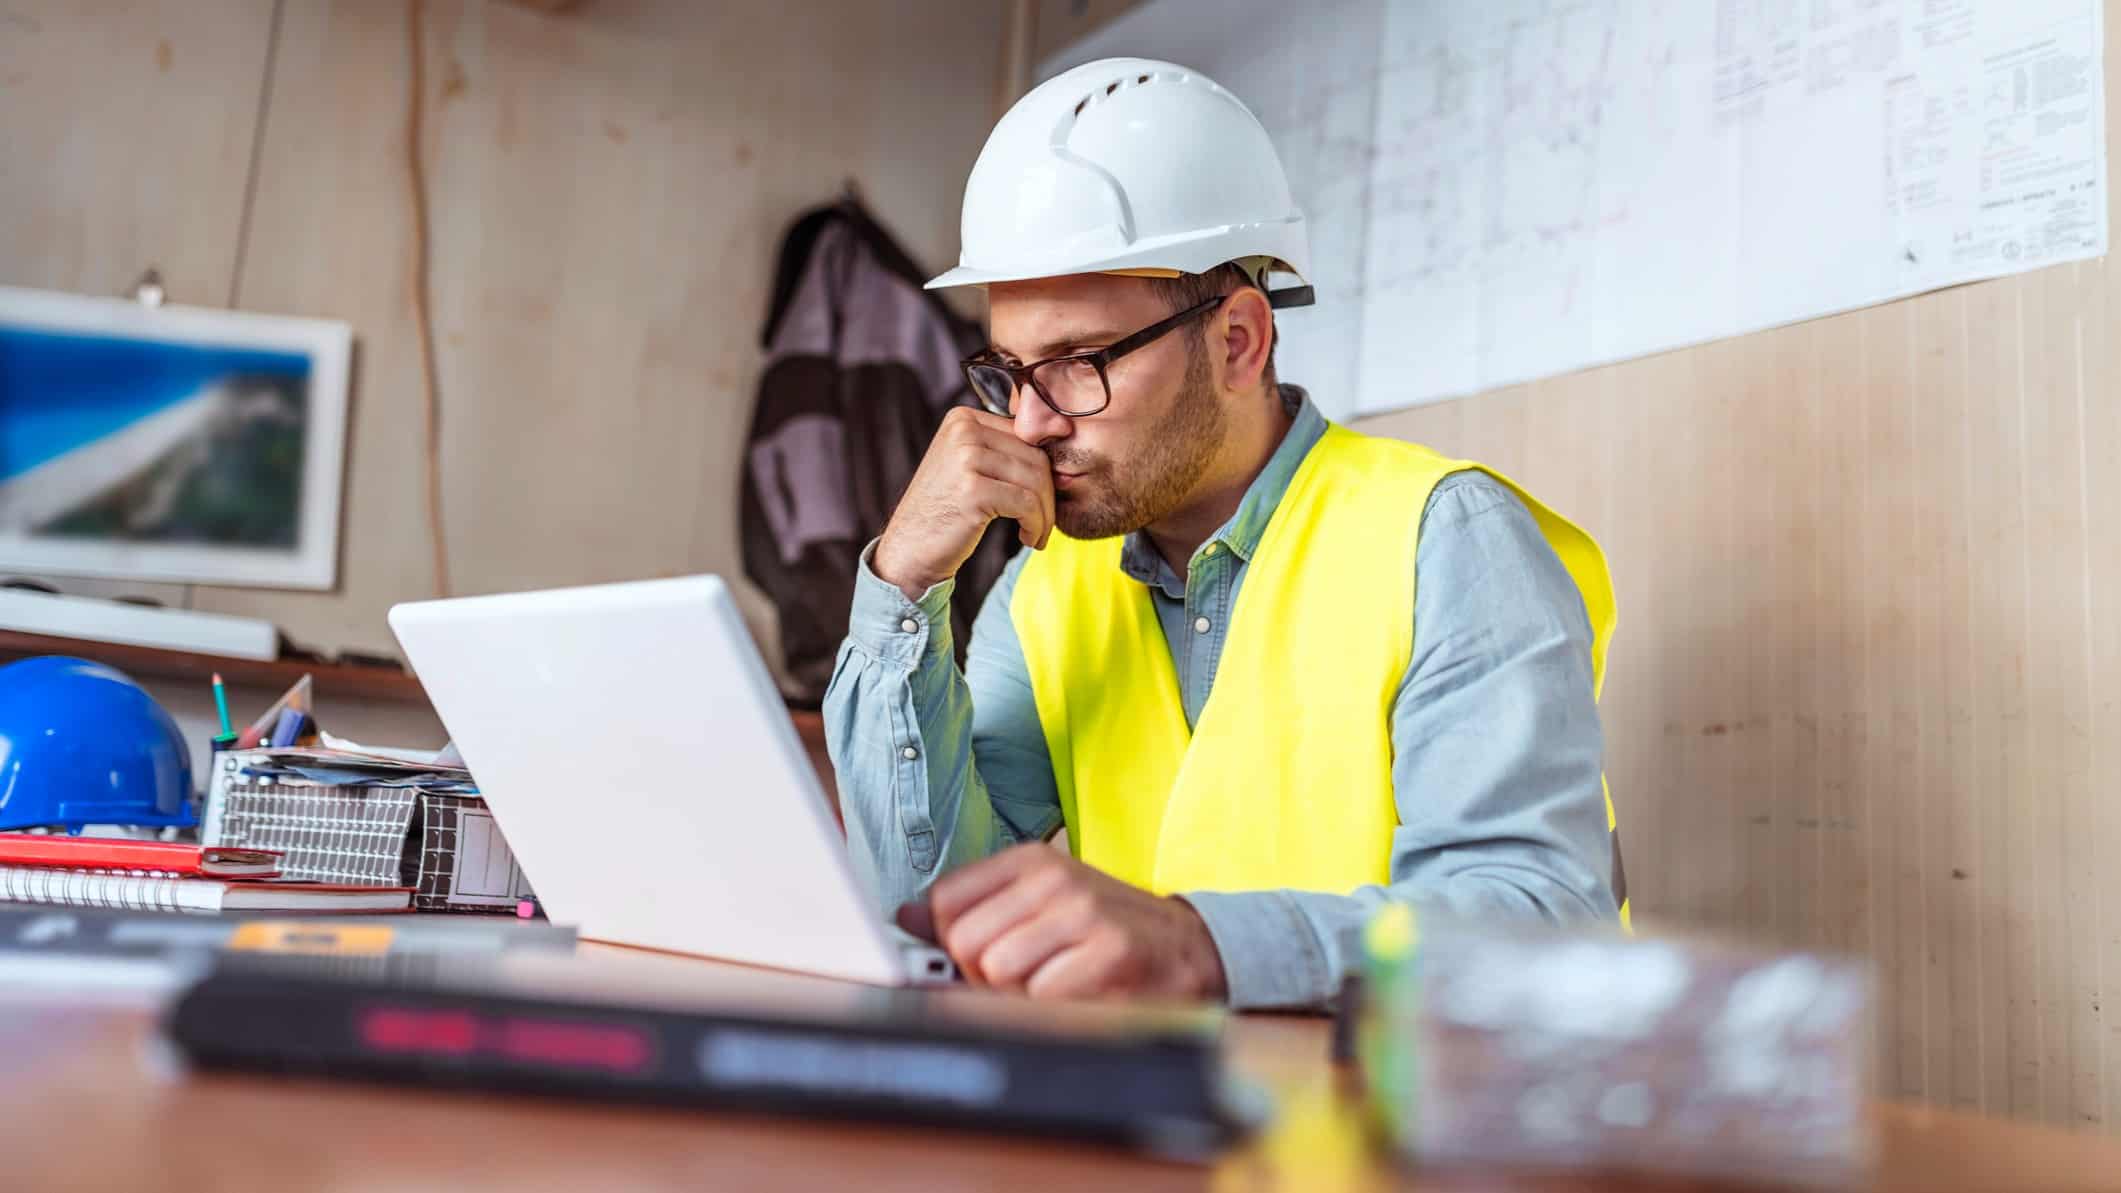 a construction worker sits pensively at his desk with his arm propping up his chin as he looks at his laptop computer while wearing a hard hat and visibility vest in a bunker style construction shed.